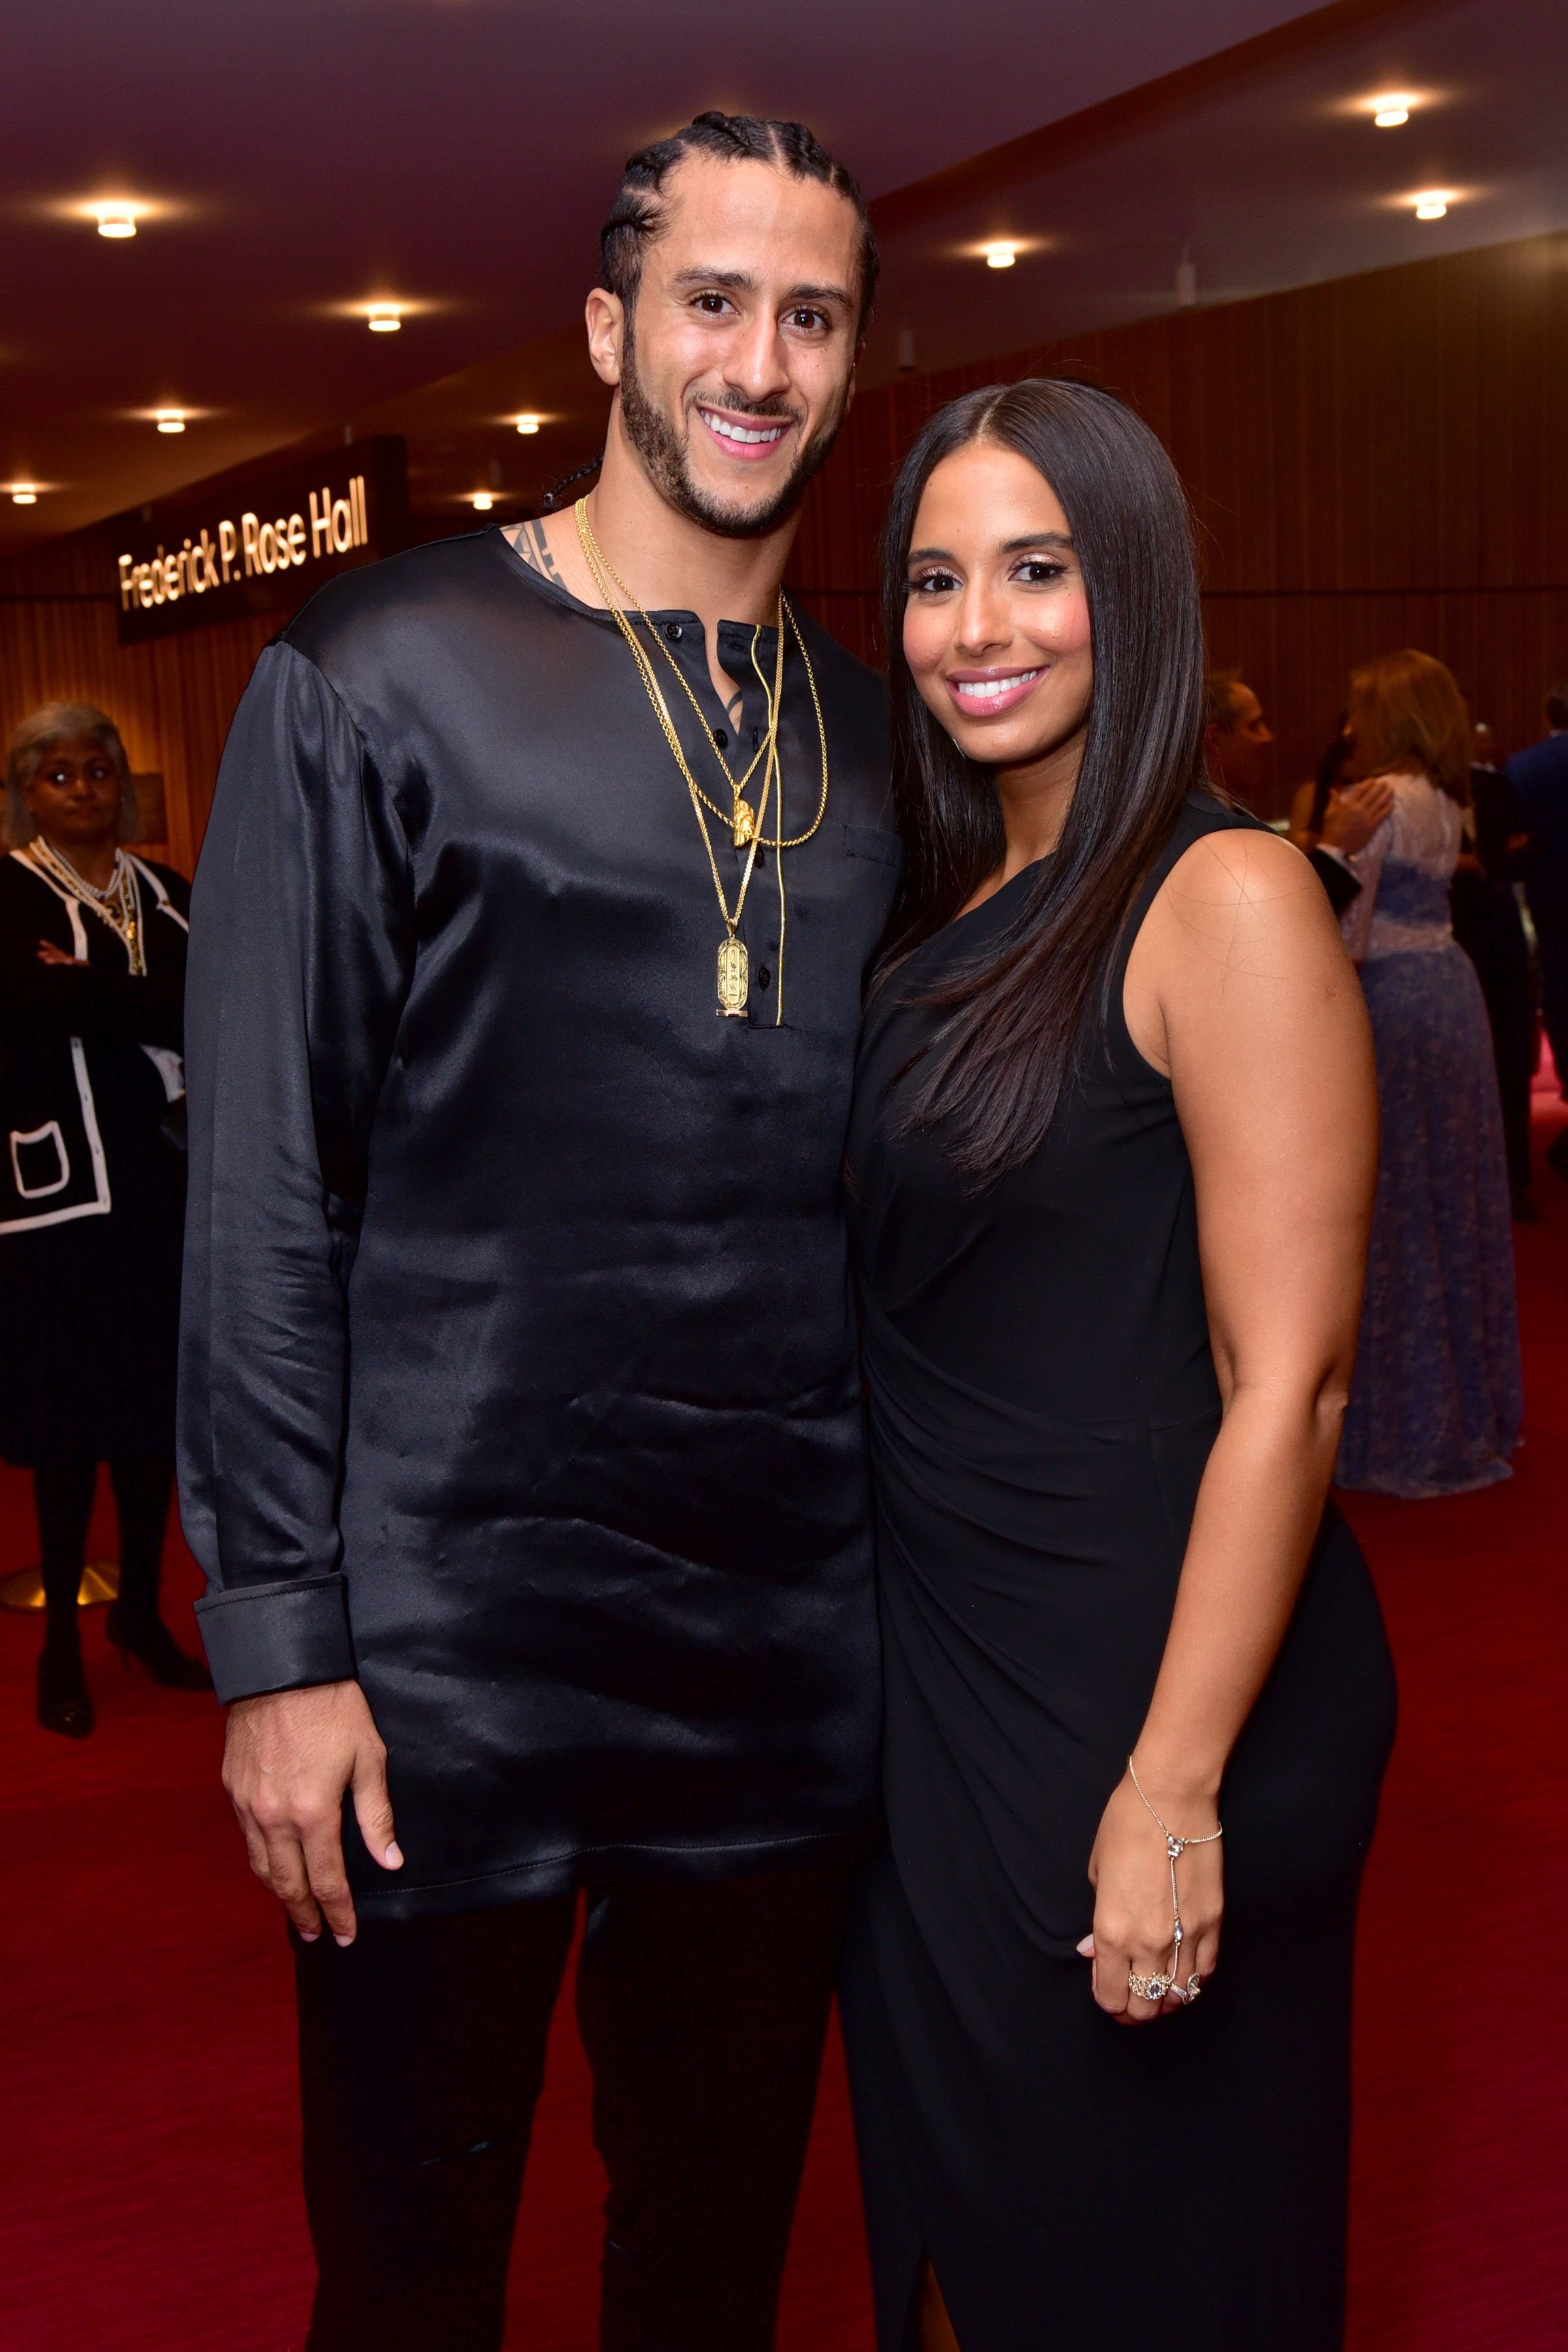 Colin Kaepernick and Nessa Diab attend the 2017 TIME 100 Gala at Jazz at Lincoln Center on April 25, 2017, in New York City. | Source: Getty Images